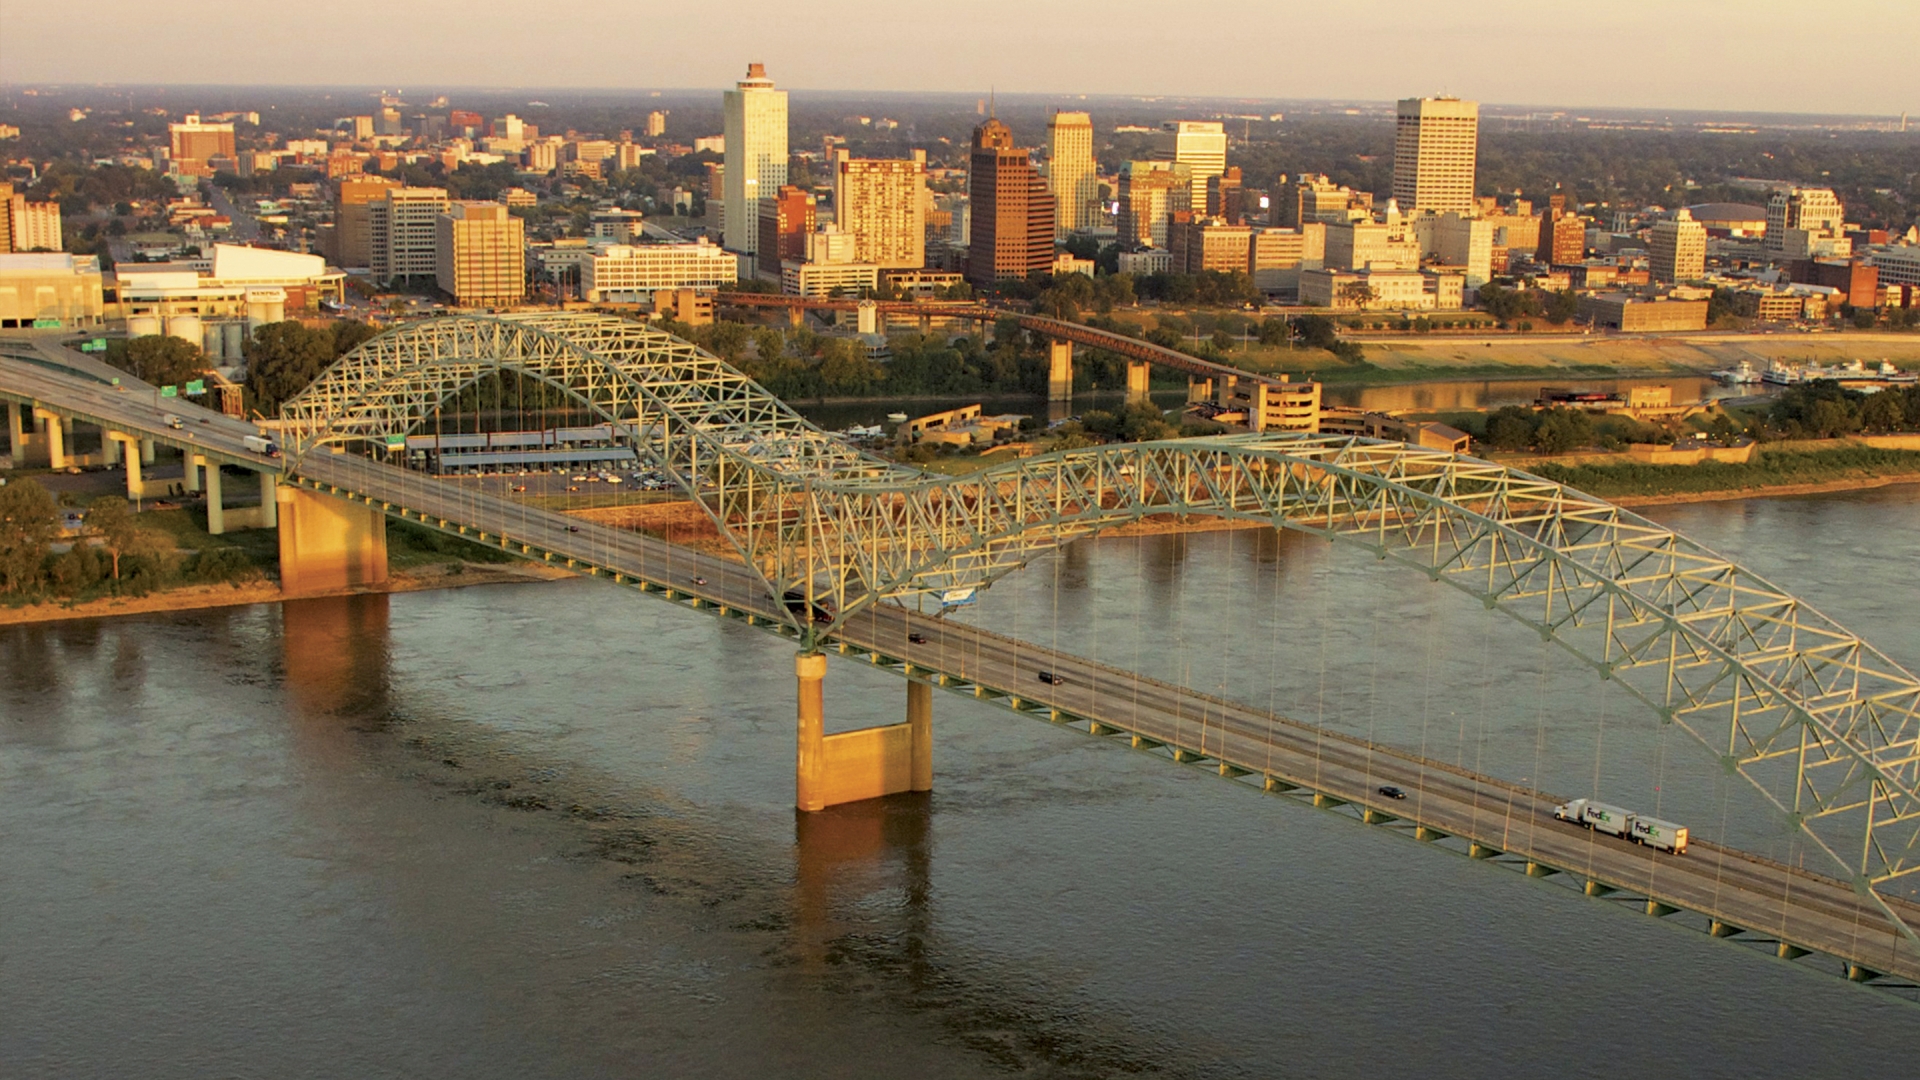 The skyline of Memphis seen from above the distinctive M shaped bridge over the Mississippi river.